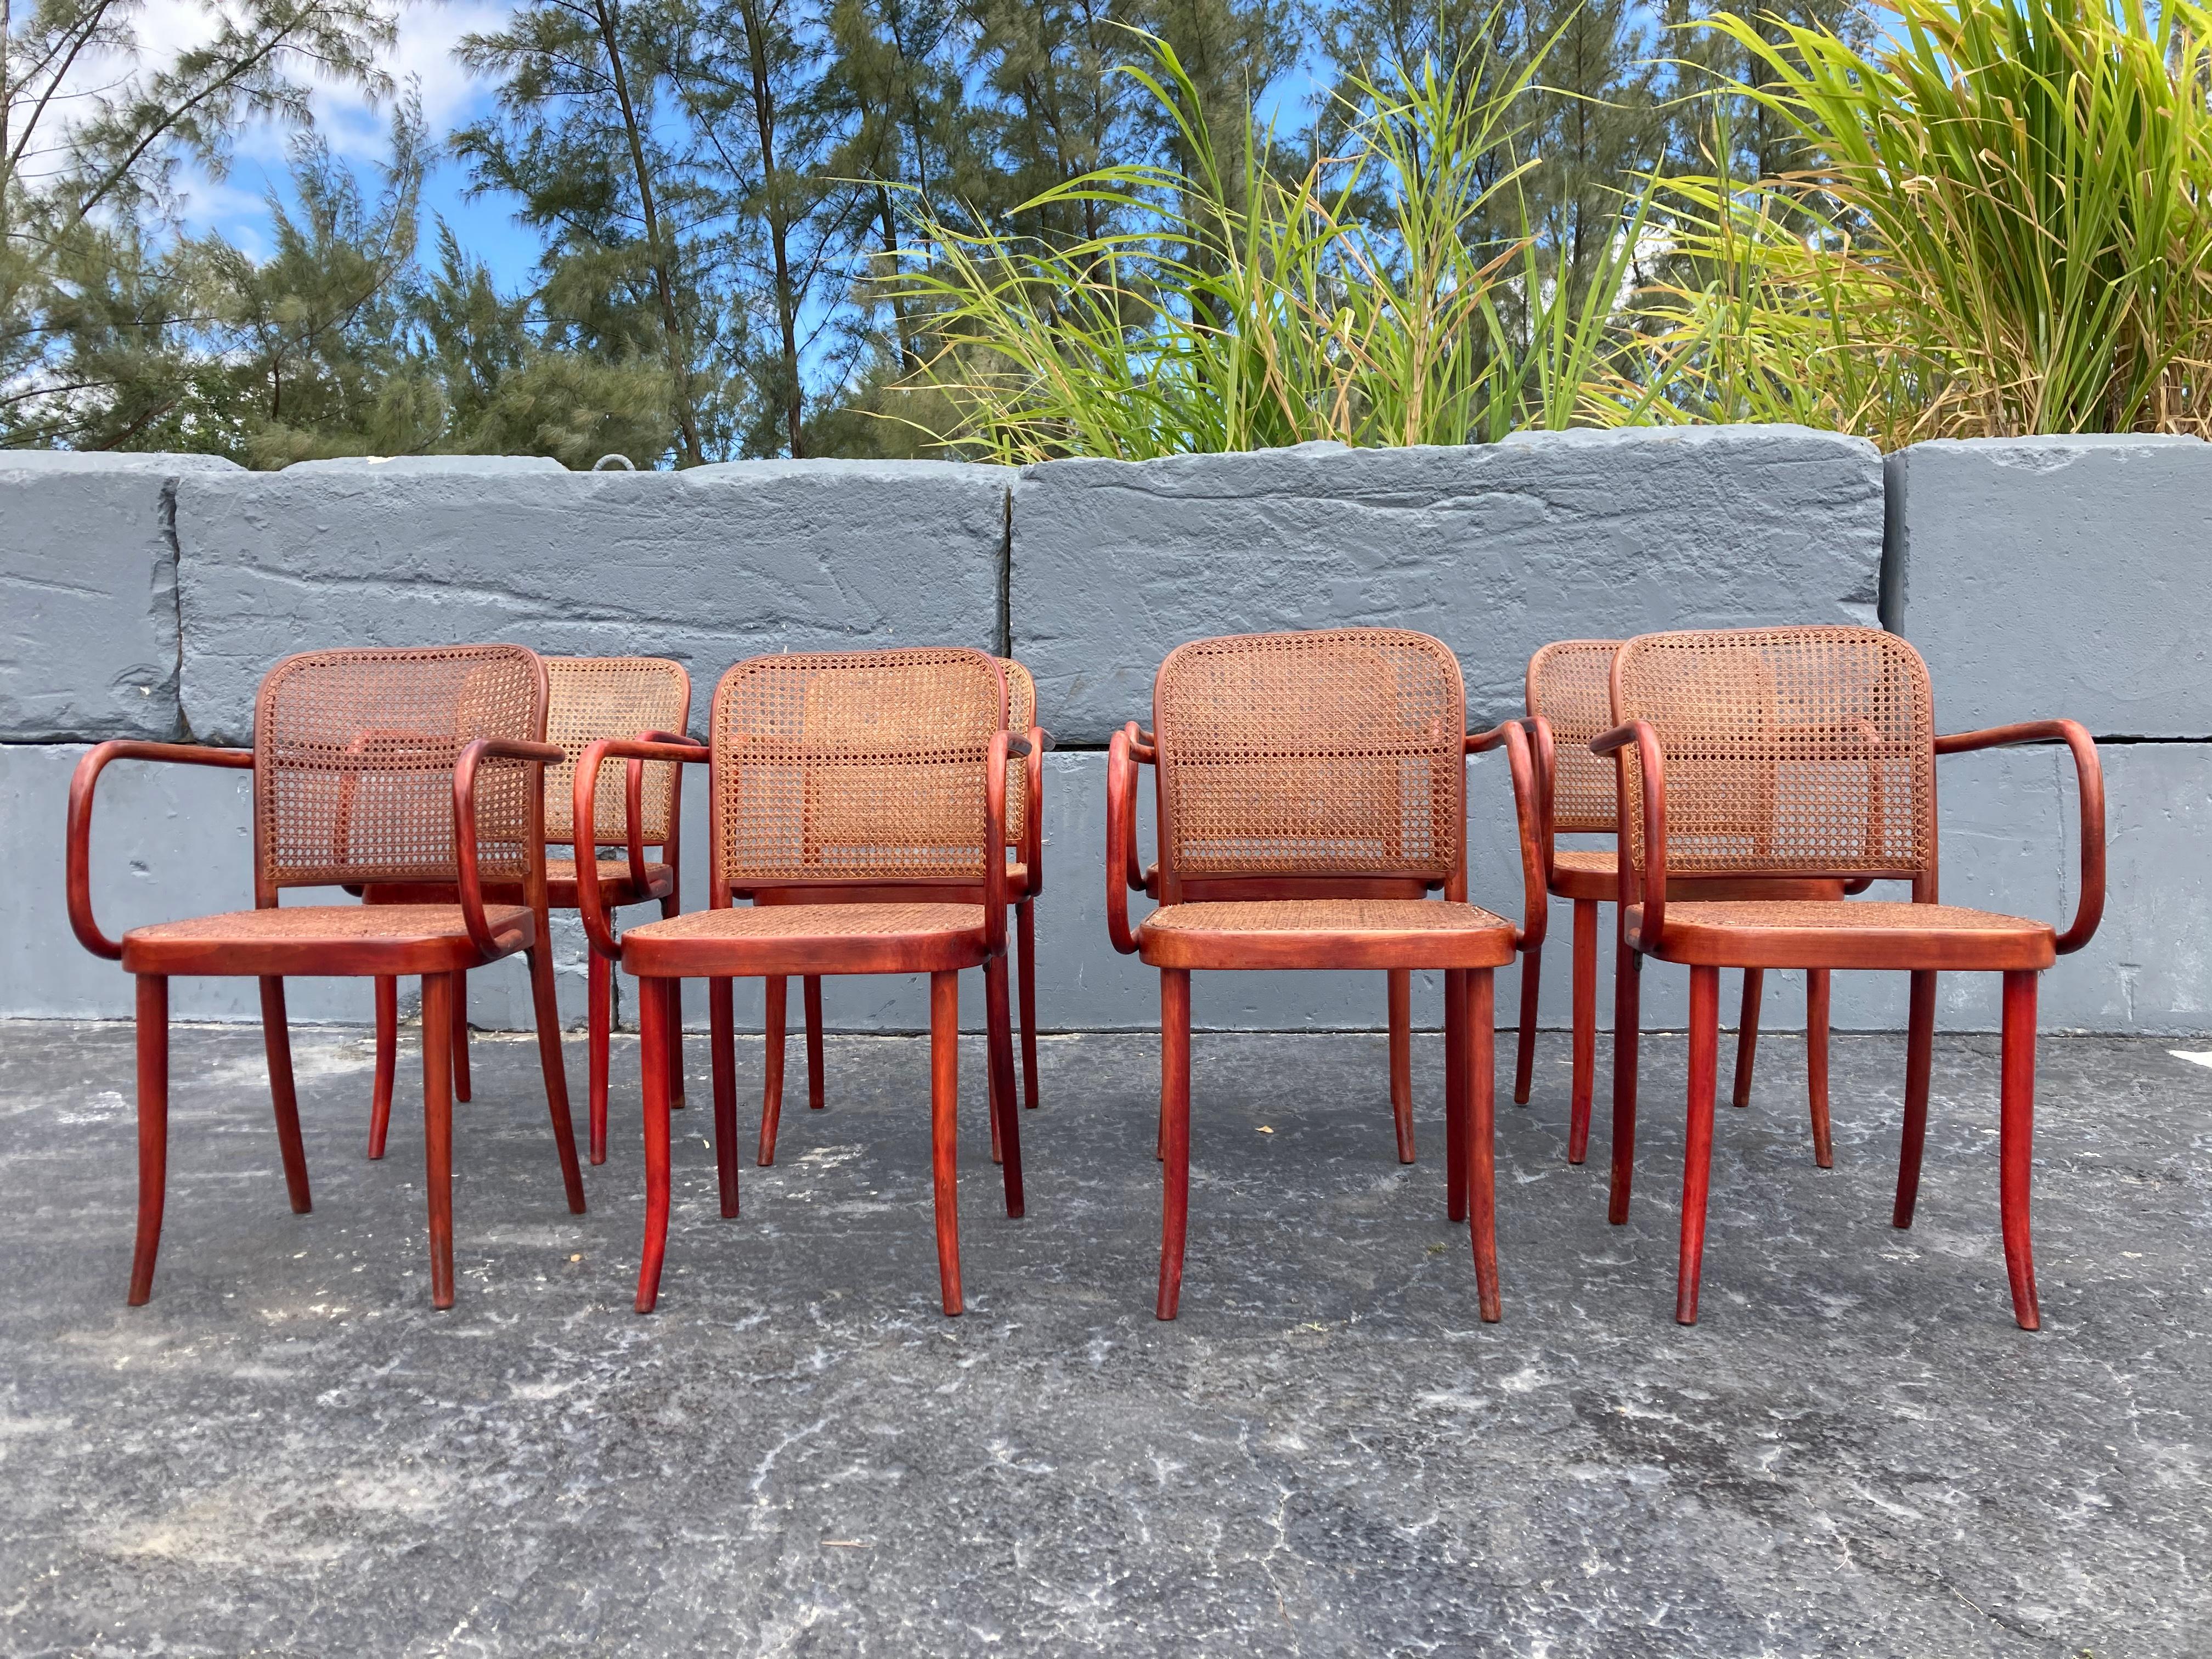 Beautiful rare set of eight Josef Hoffmann chairs in original red stain finish. Measures: Arm height is 27”.
Chairs have variations in color of wood and cane. Rich patina.